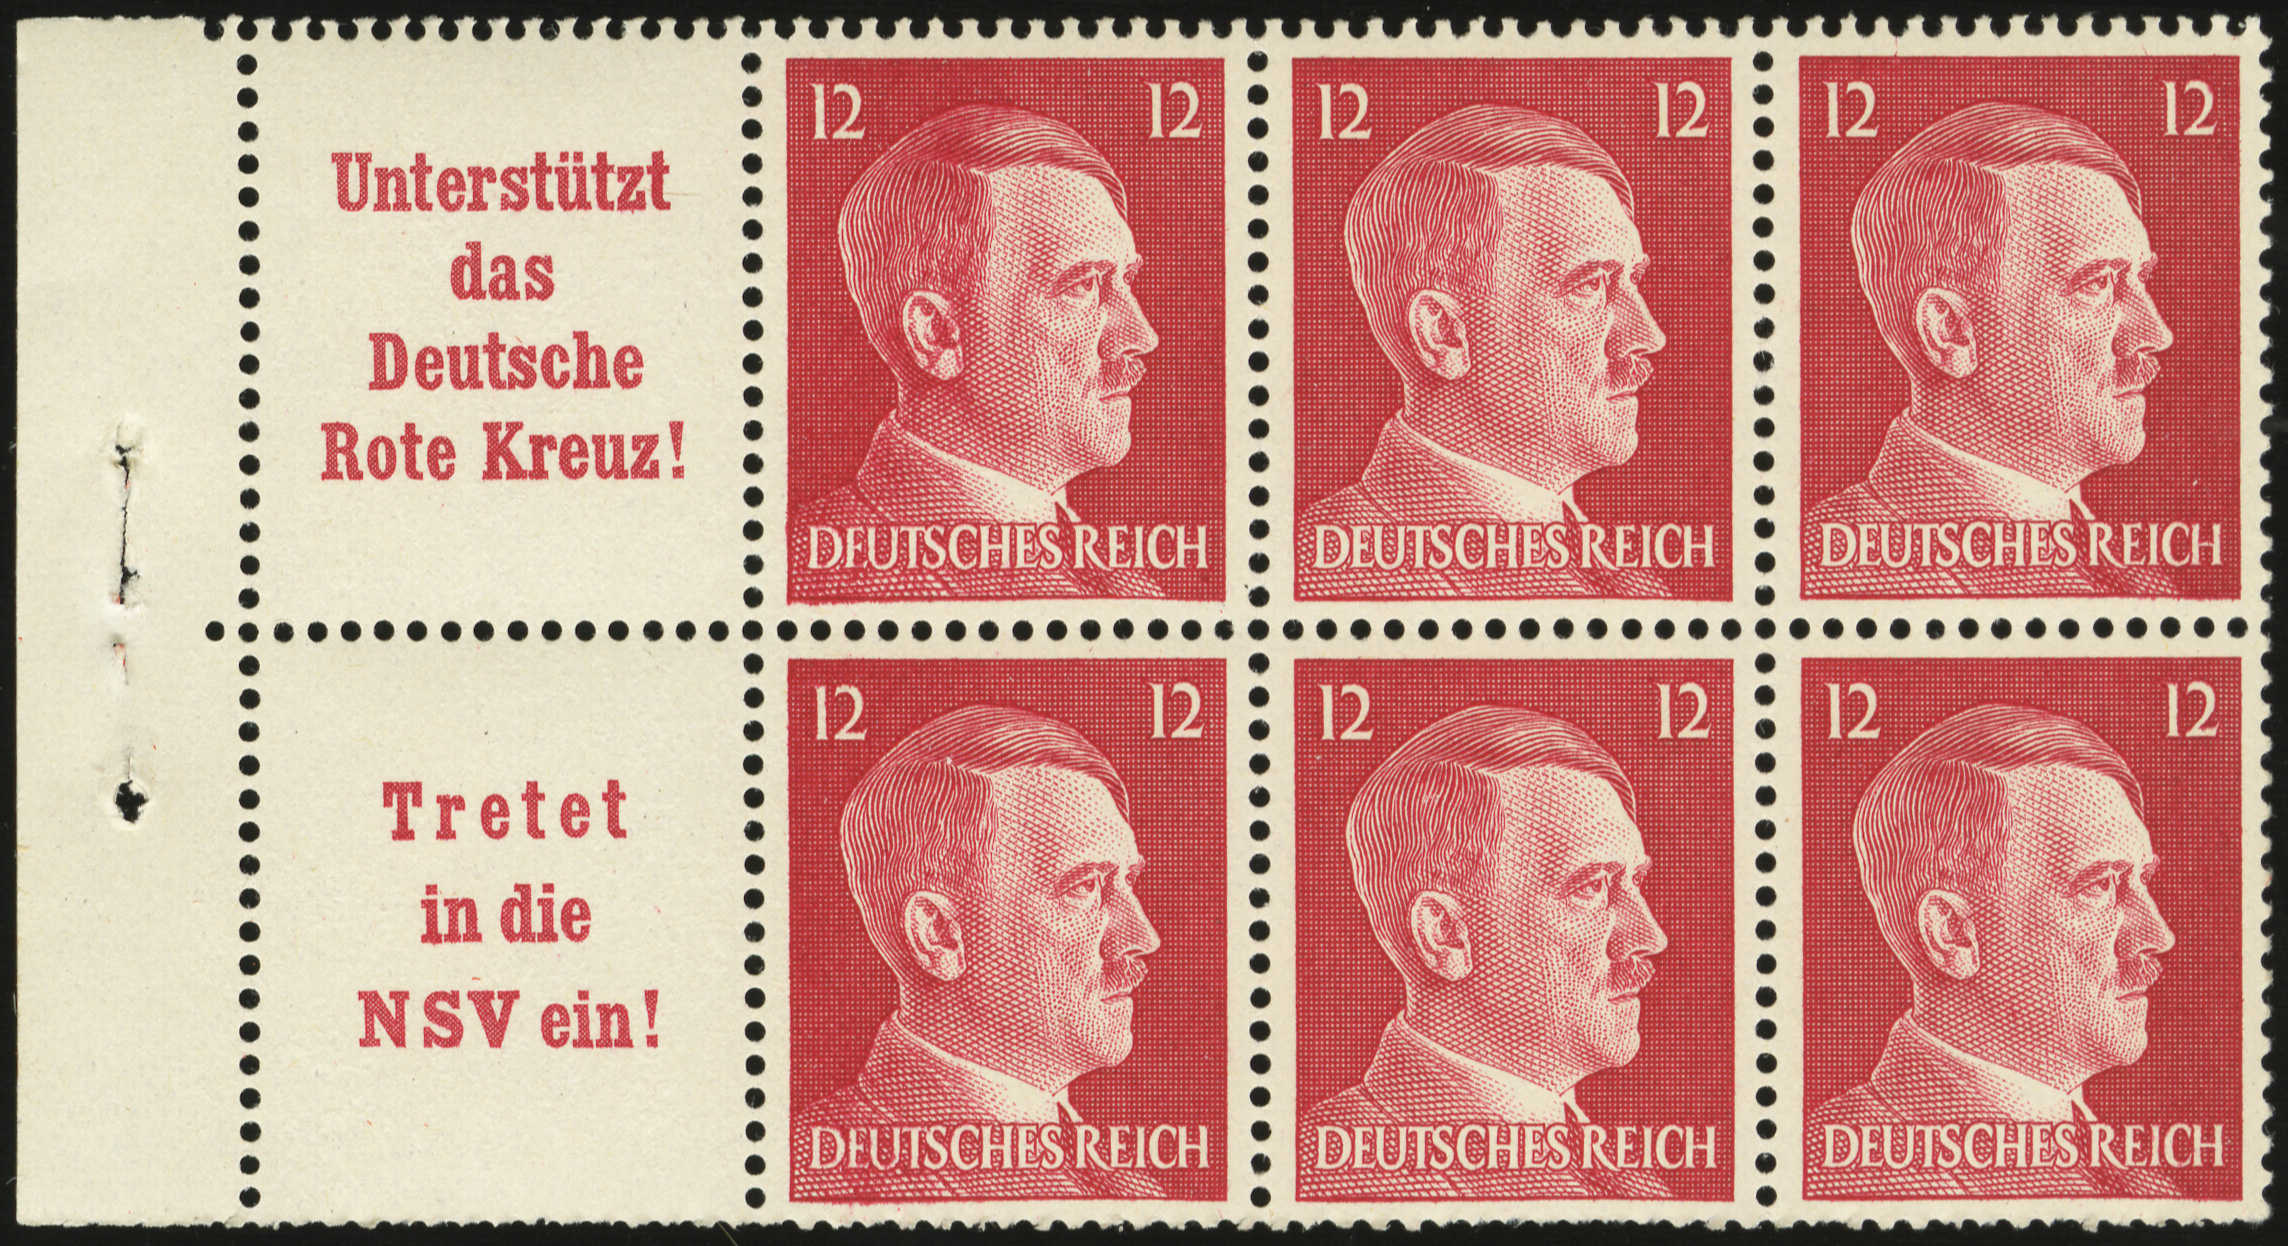 Germany - 513a - 1941 (booklet pane of 6)